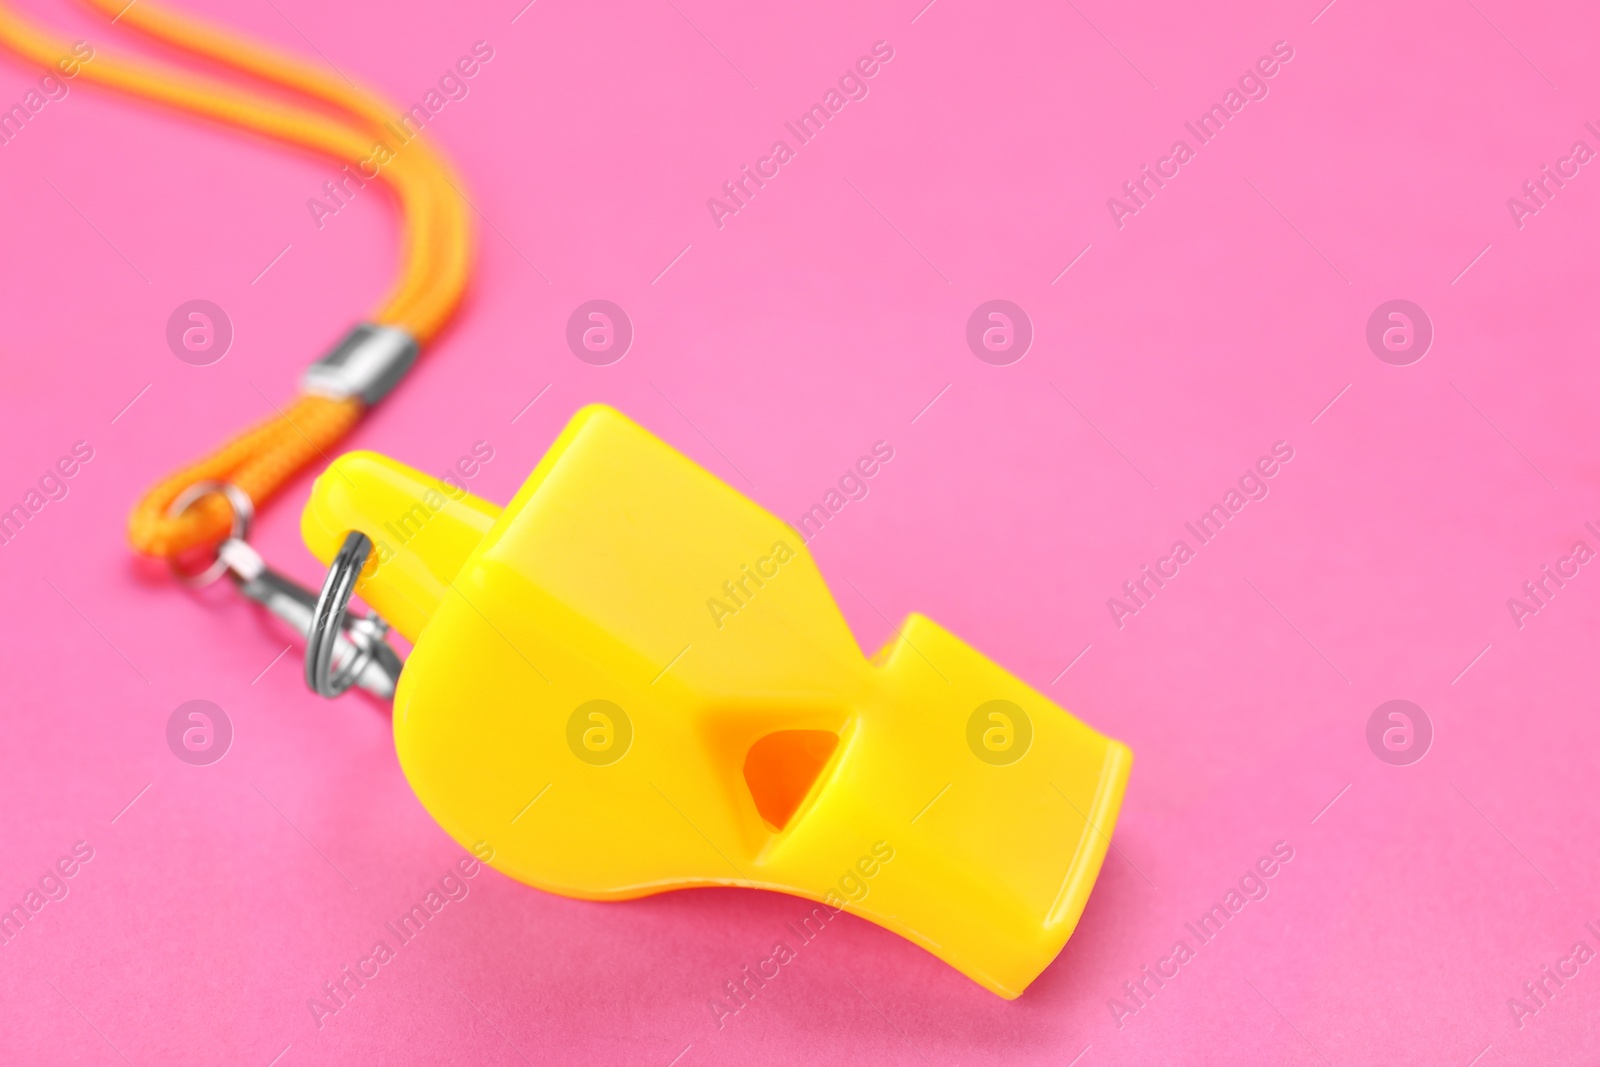 Photo of One yellow whistle with cord on pink background, closeup